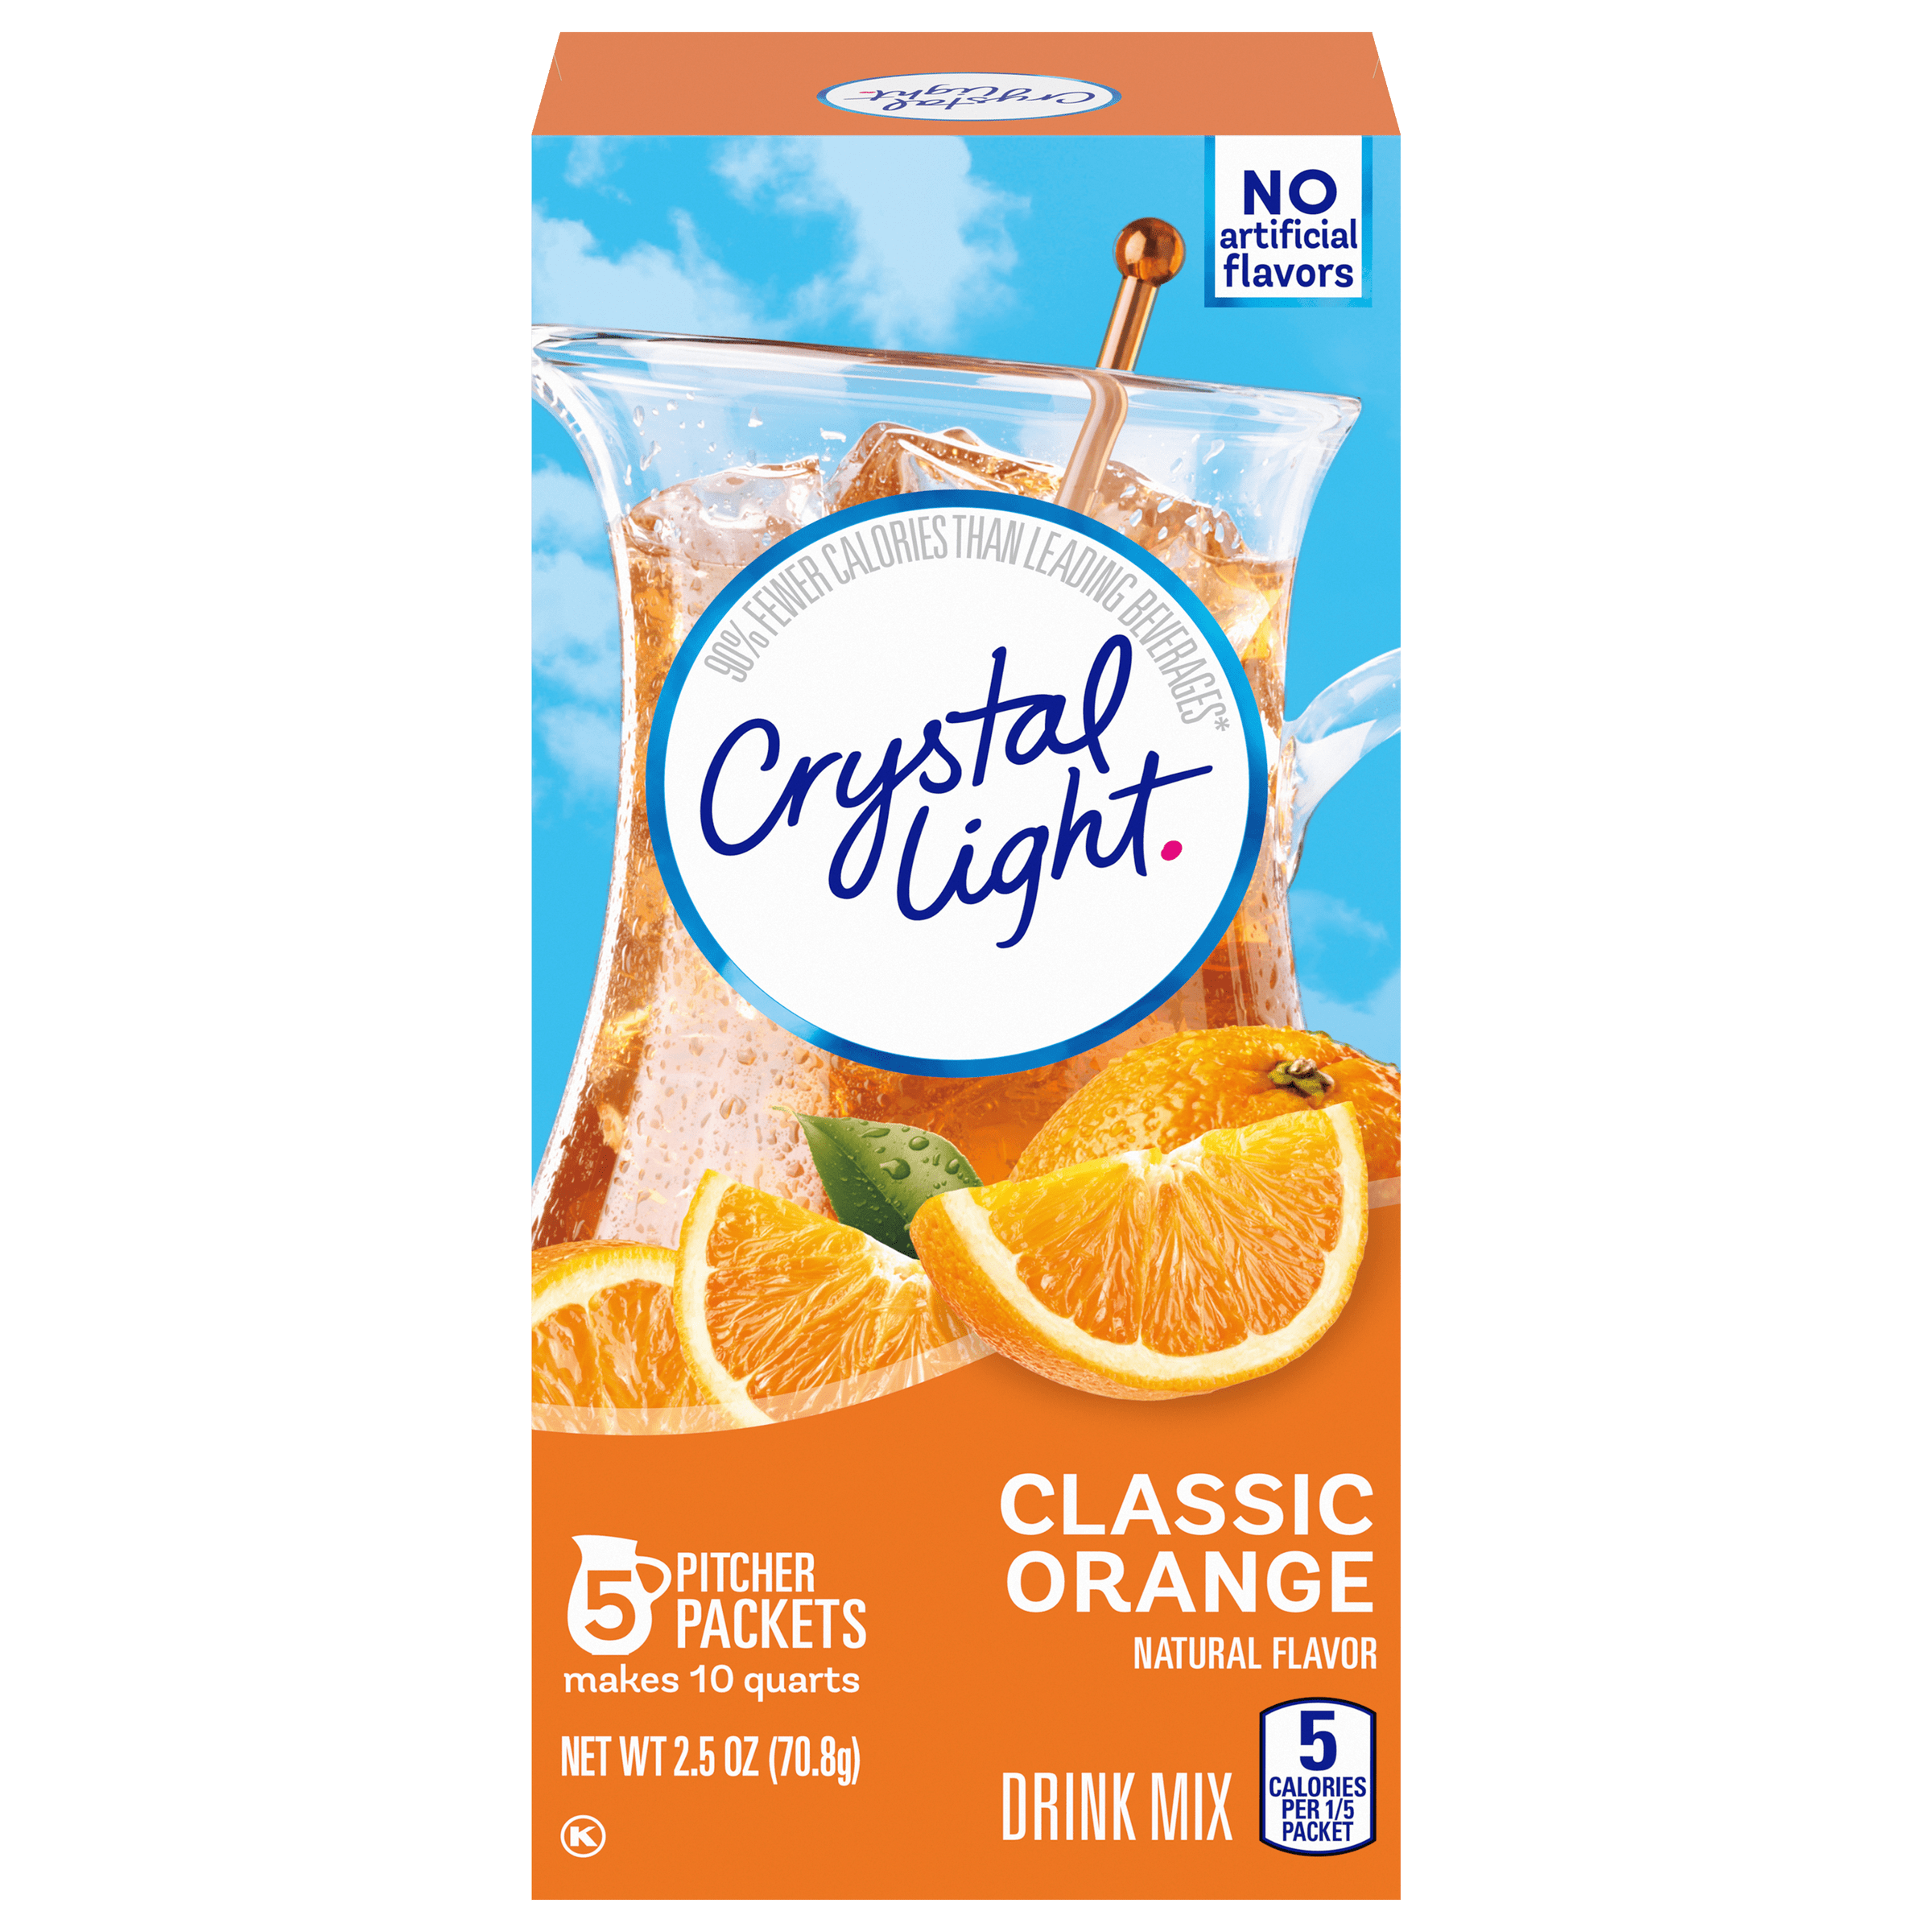 Classic Orange Naturally Flavored Powdered Drink Mix